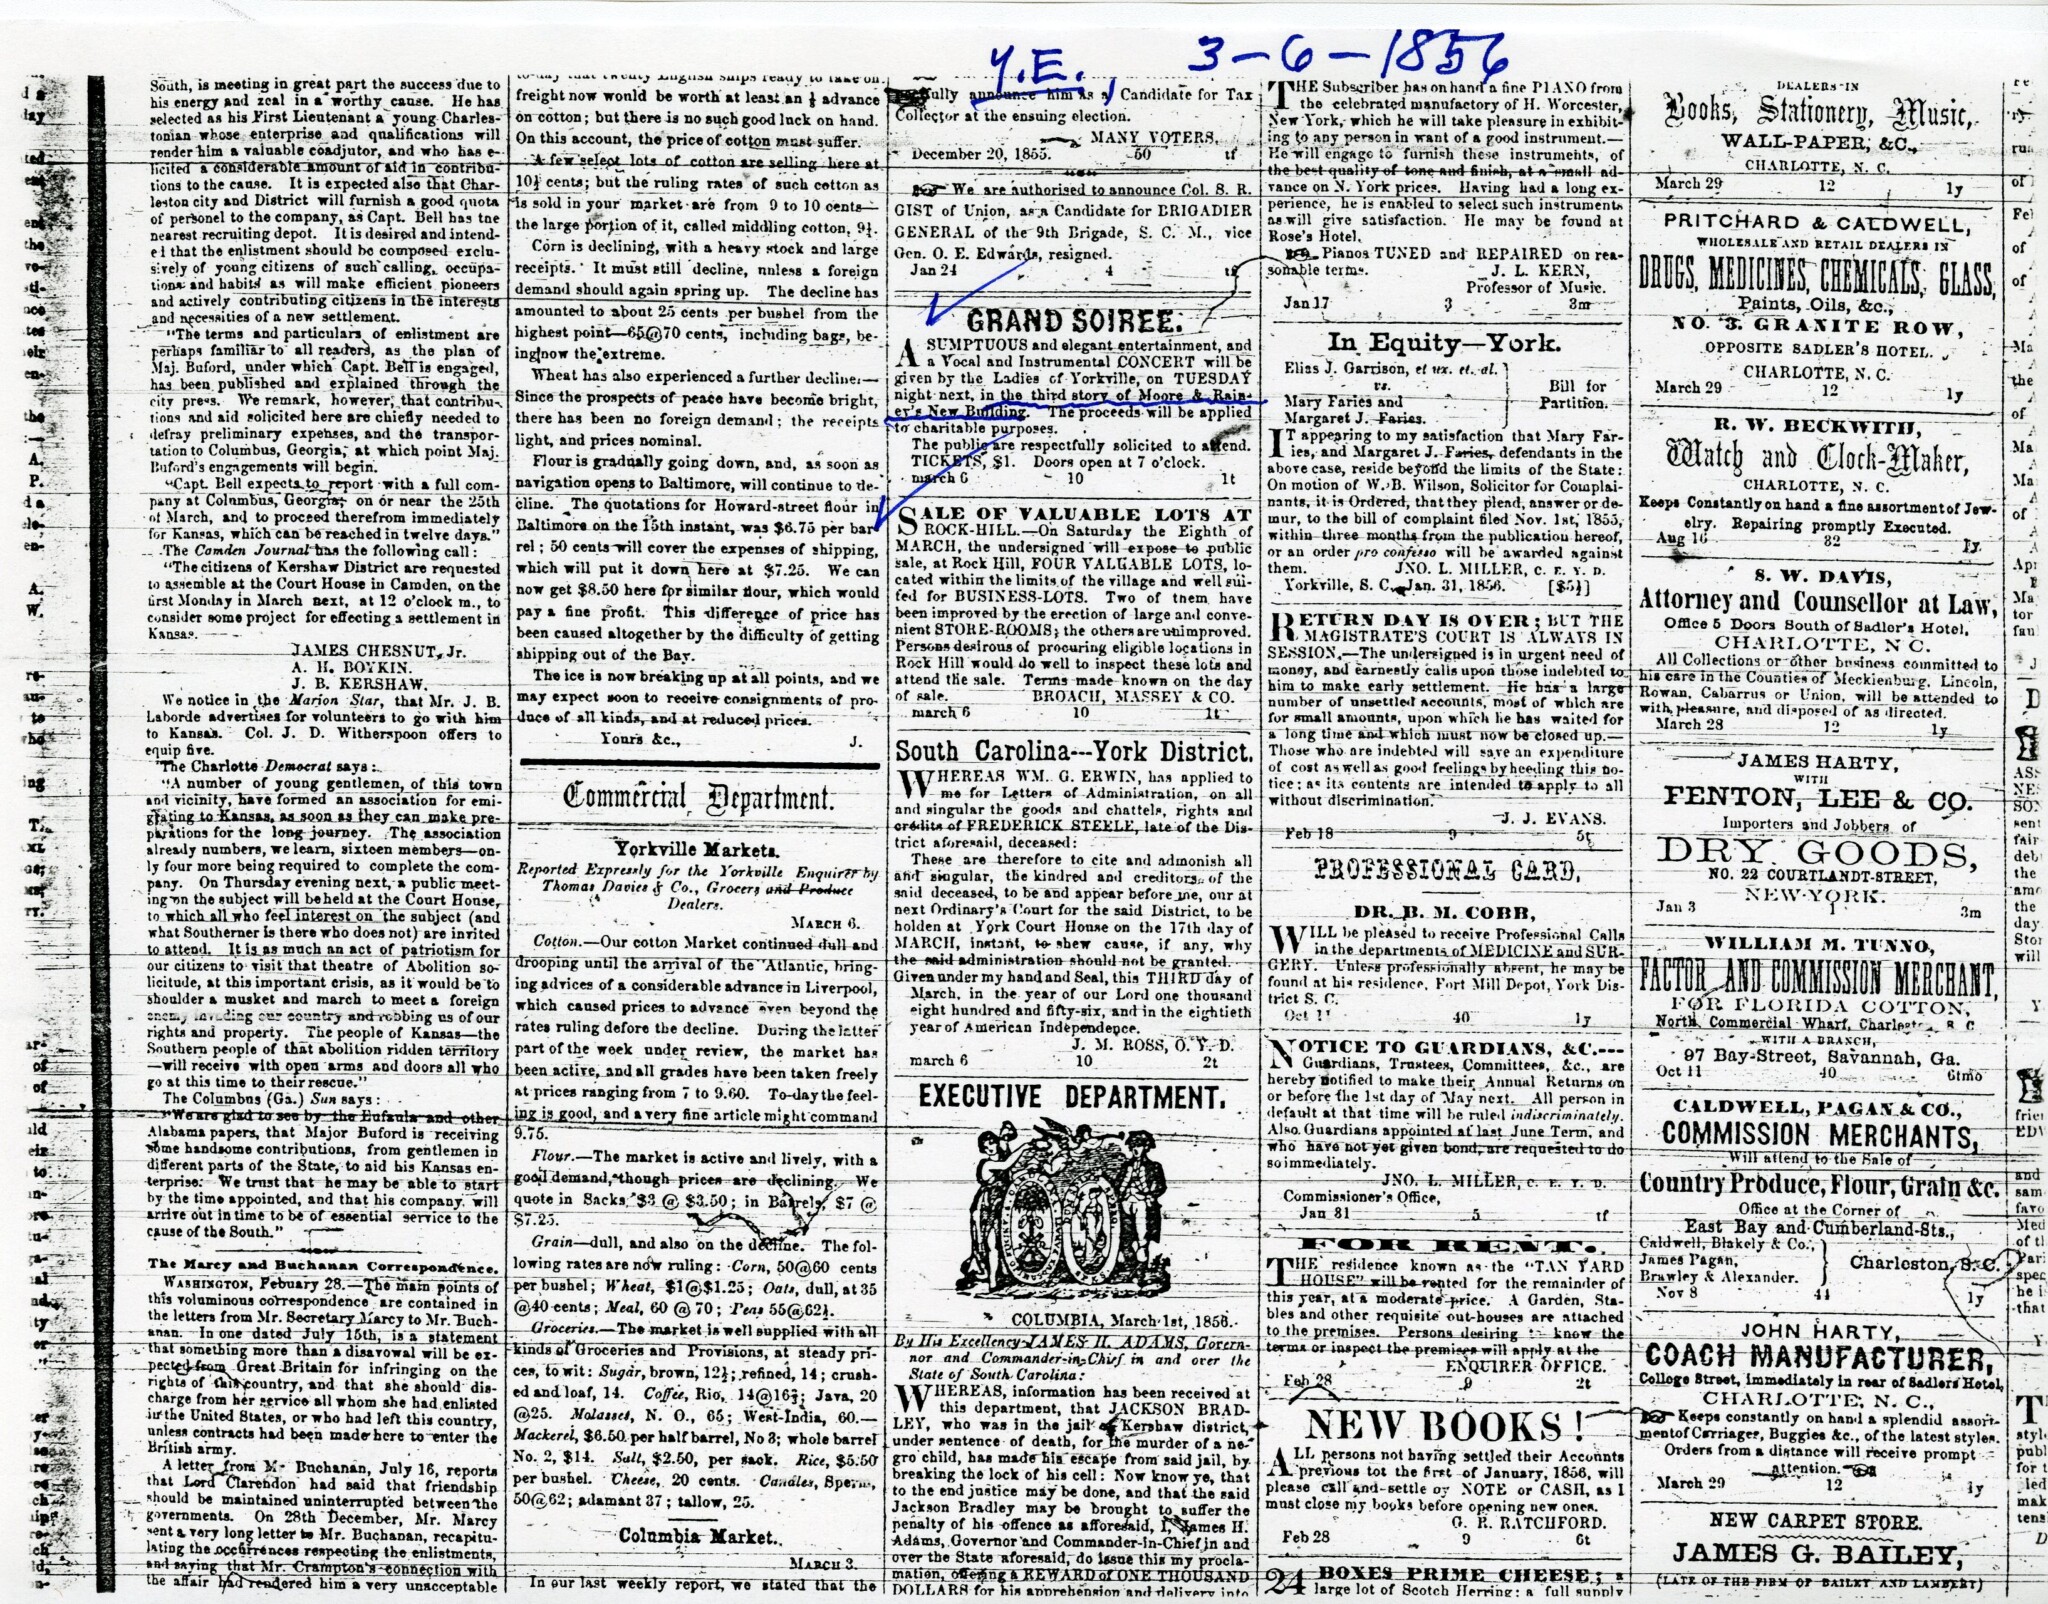 Sale of Rock Hill Lots by Roach and Massey - 1856